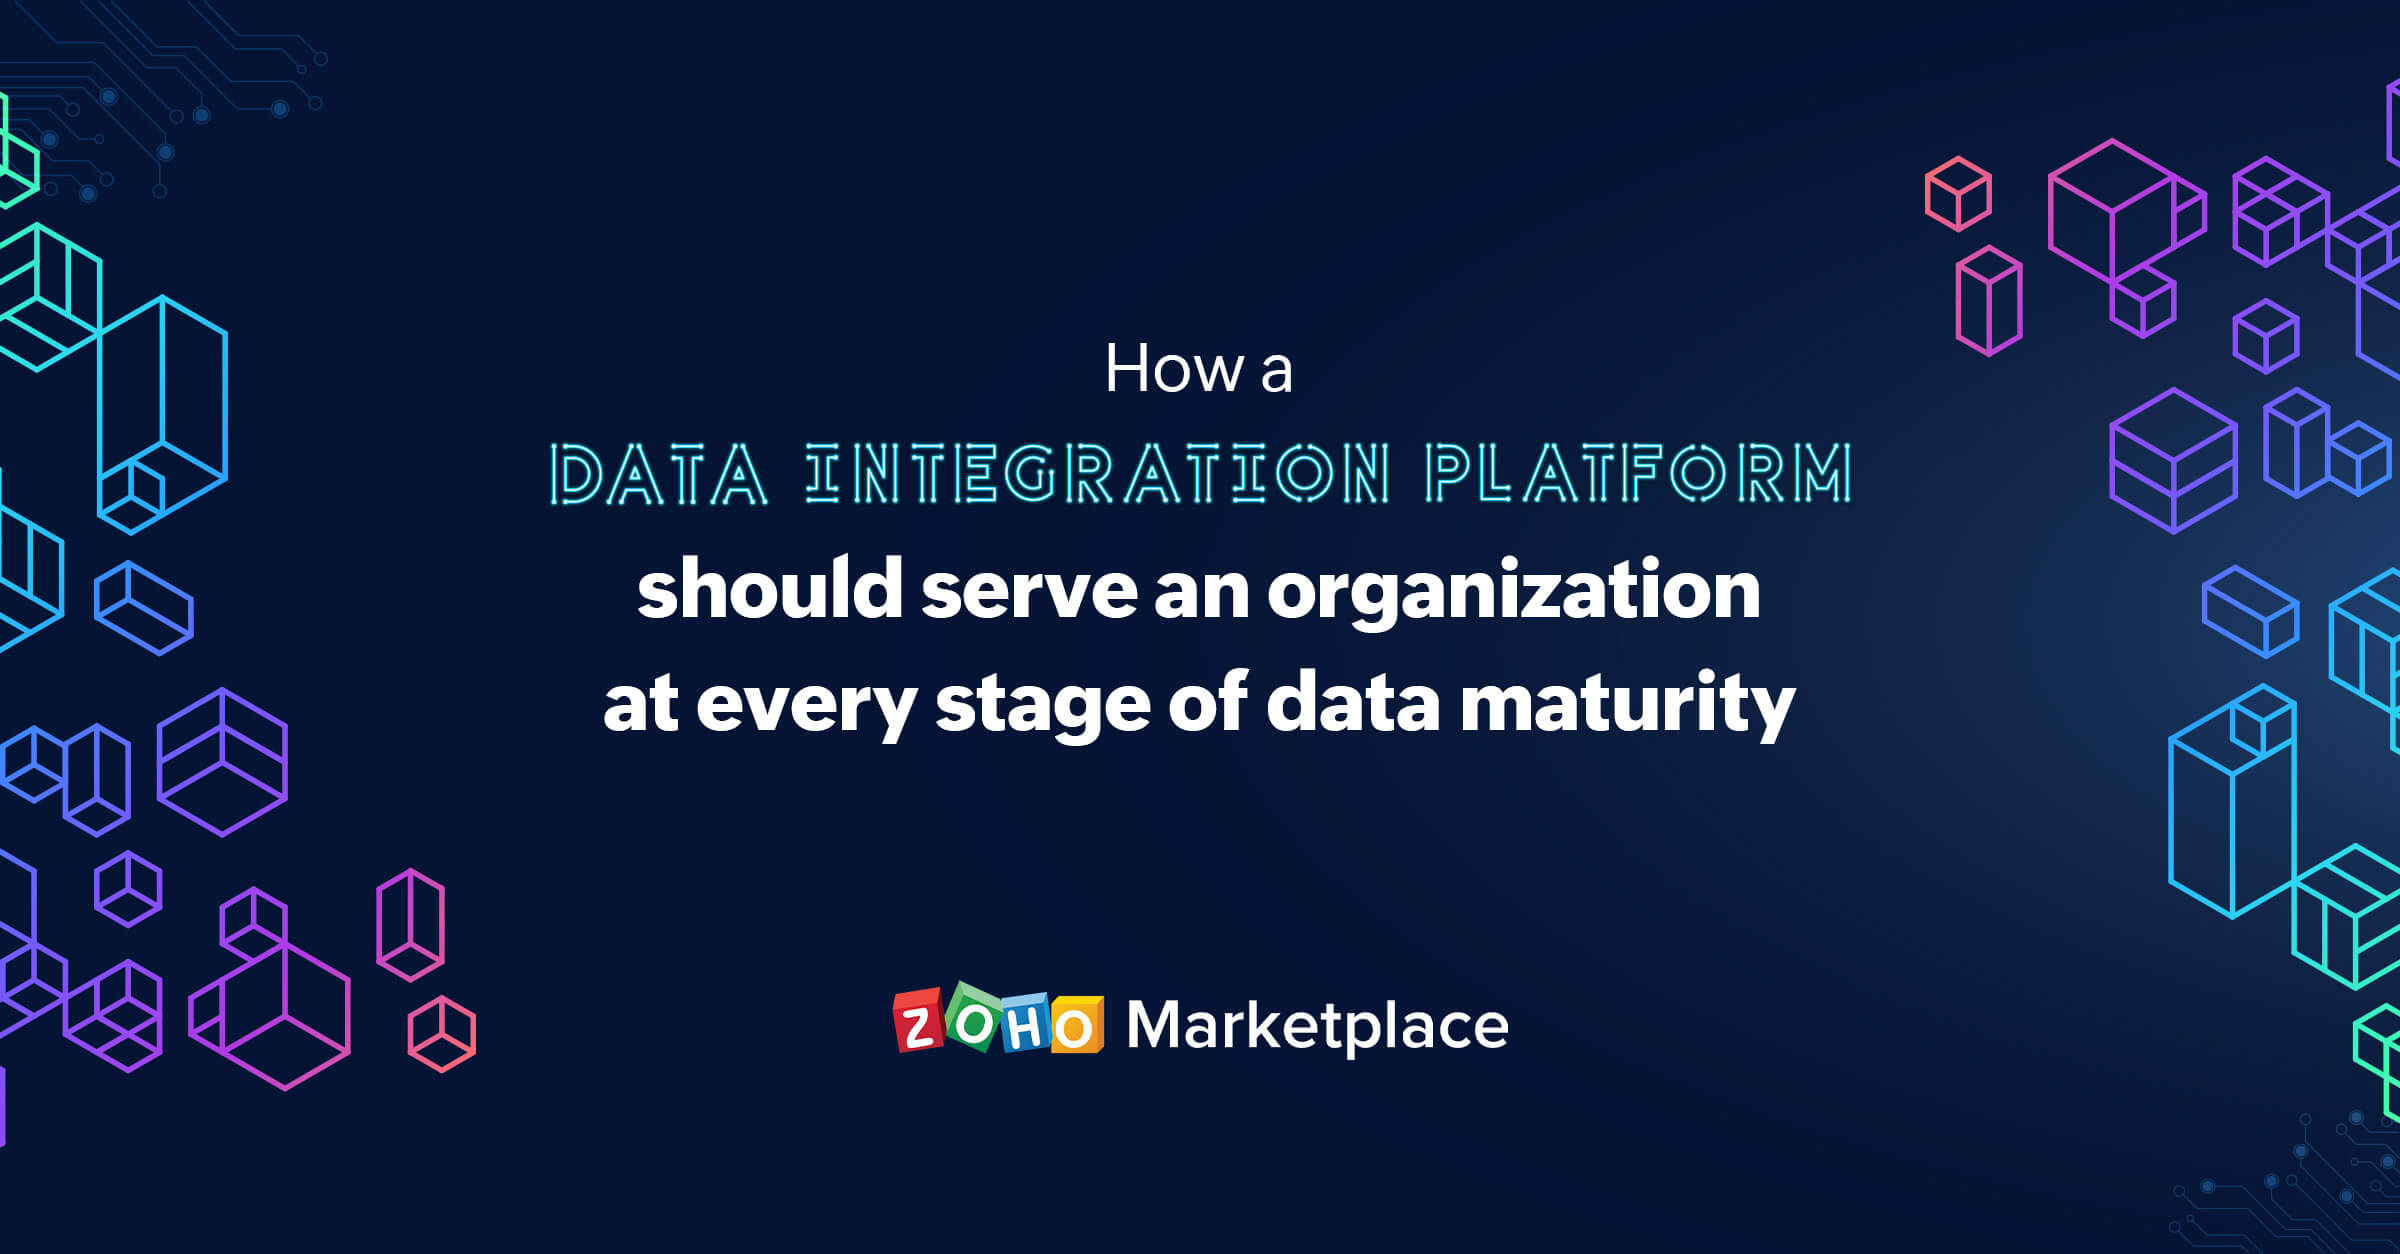 How a data integration platform should serve an organization at every stage of data maturity